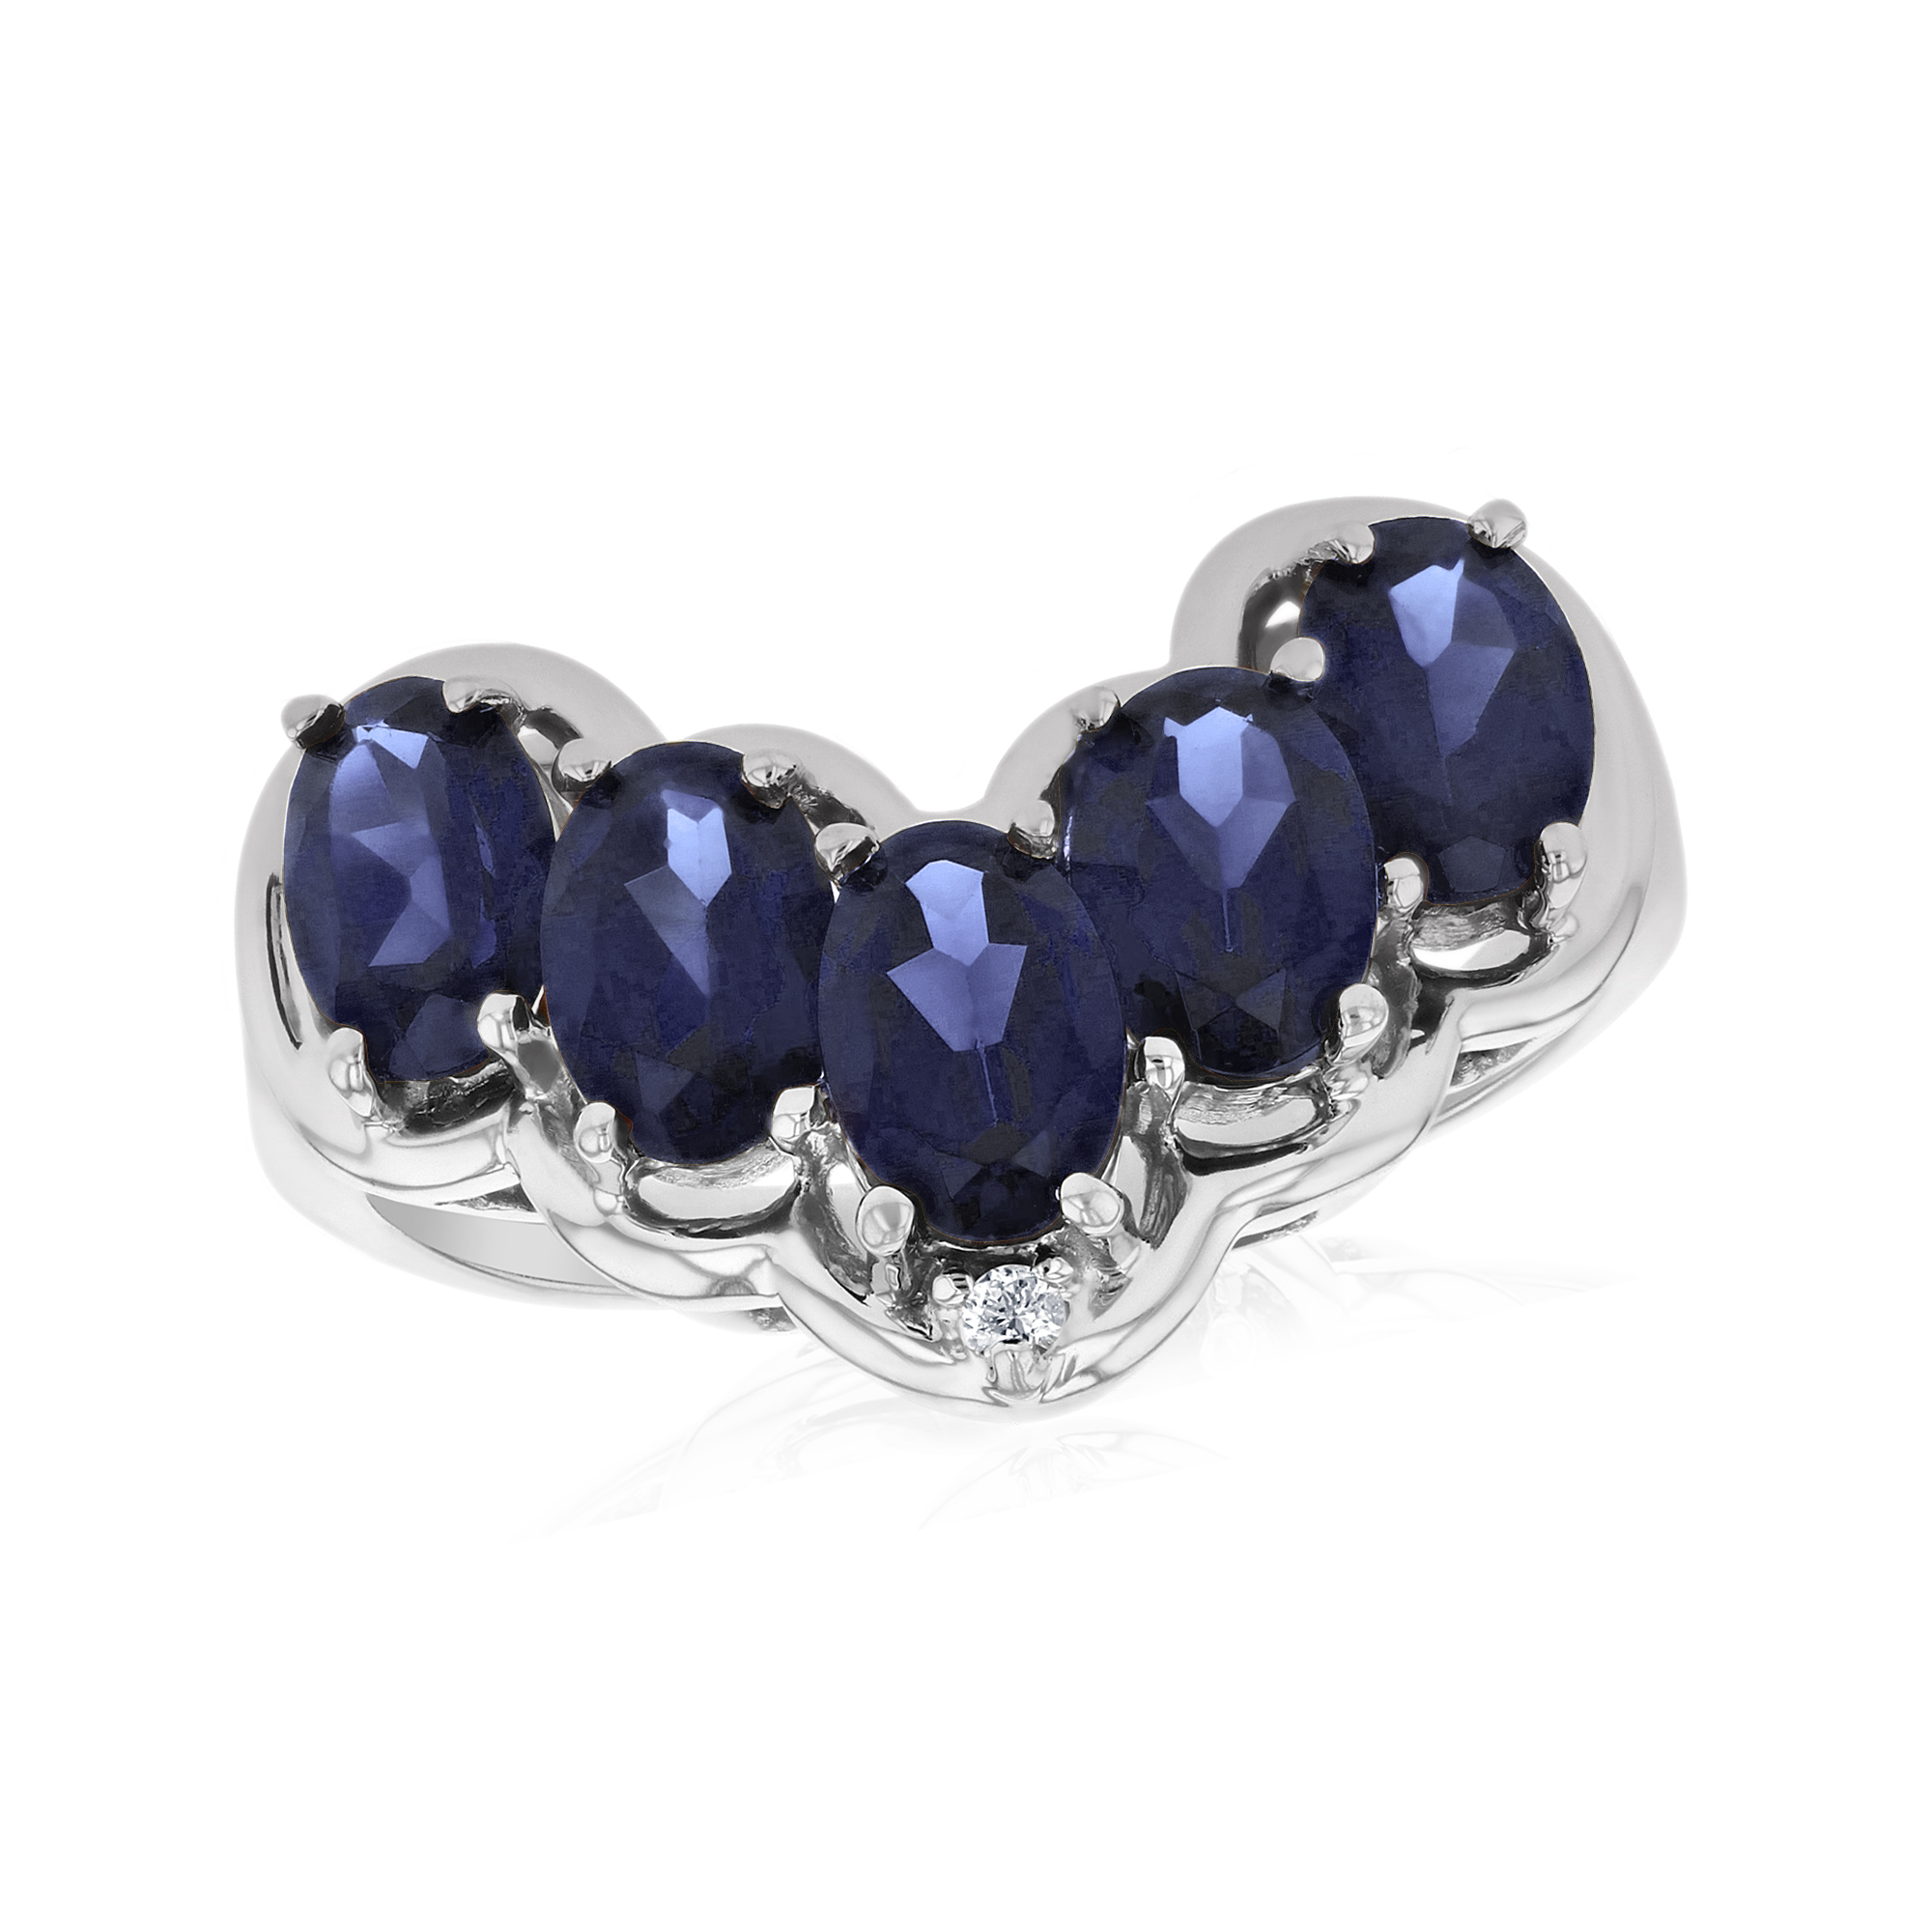 View 0.01ctw Diamond and Sapphire Fashion ring in 14k White Gold